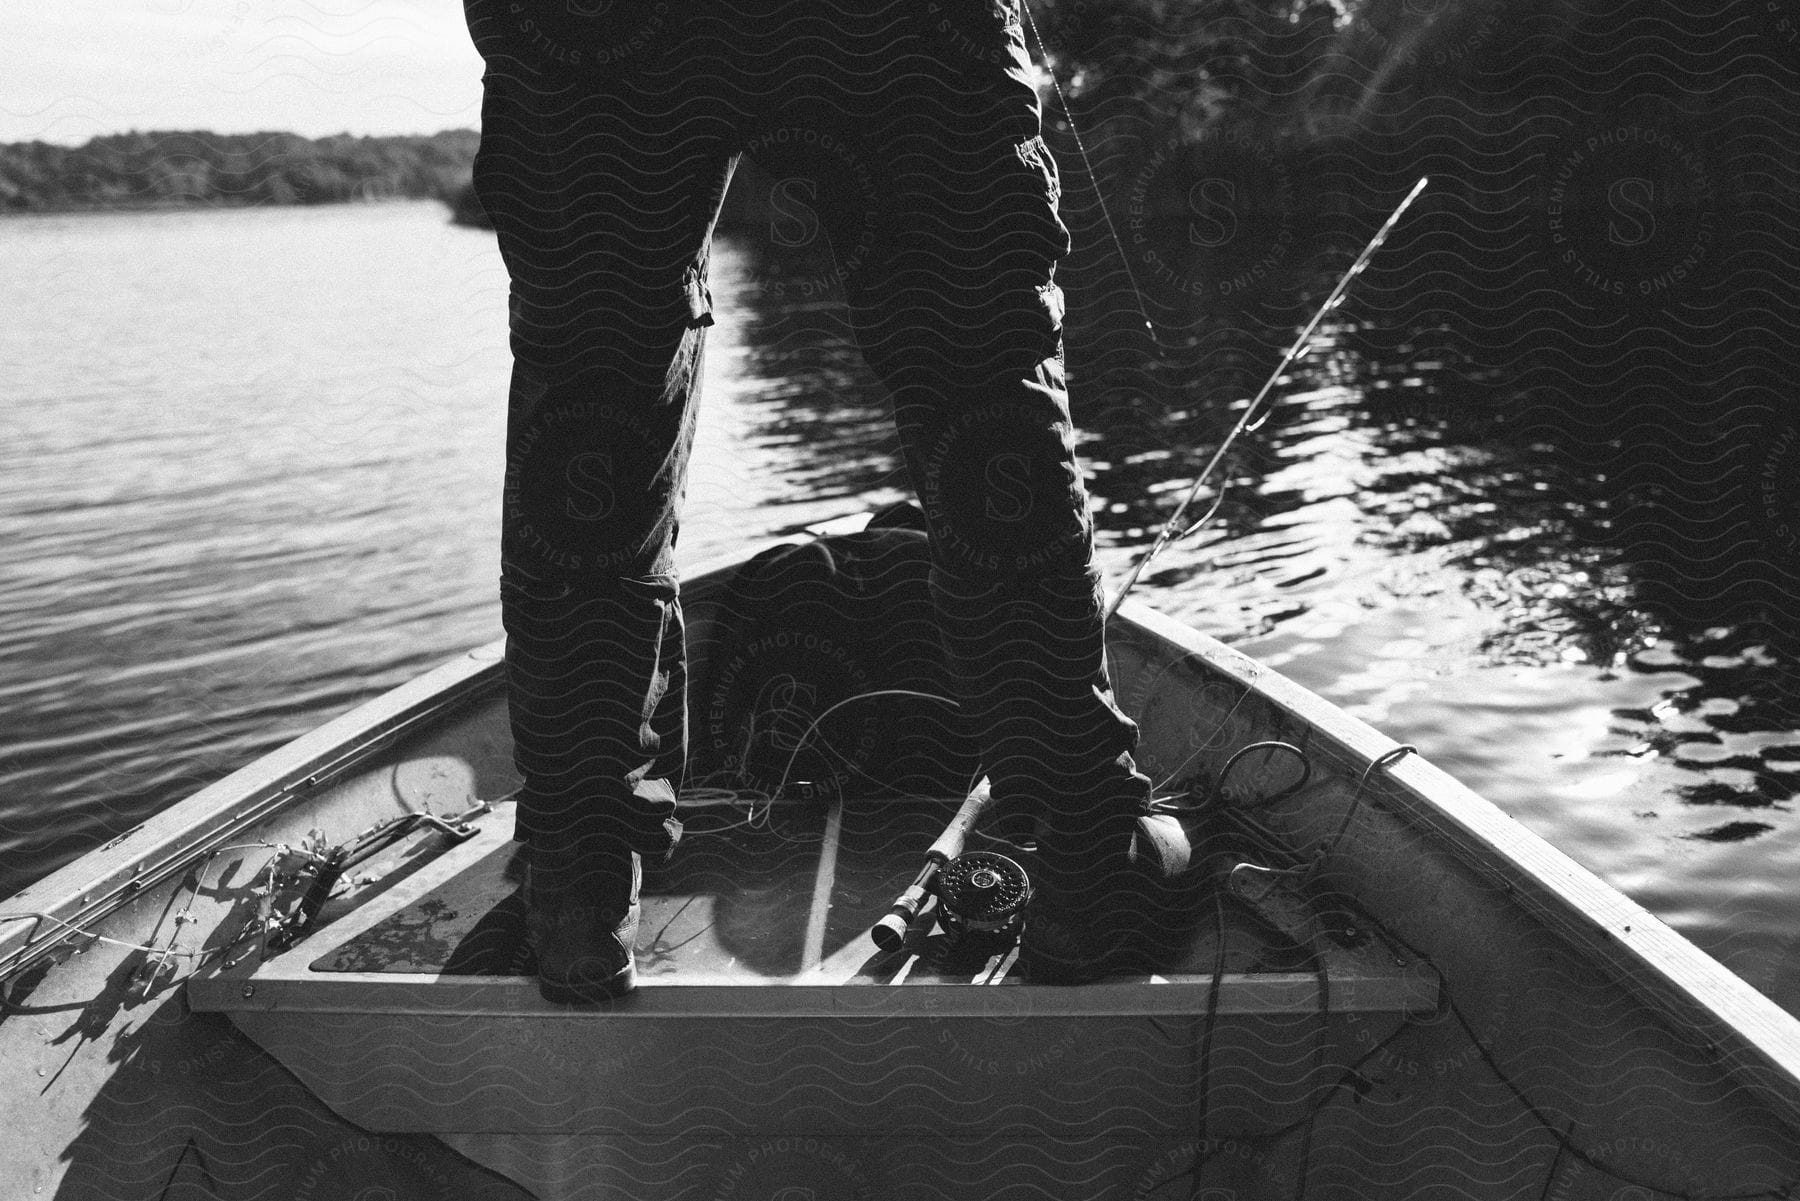 Fisherman standing in his small boat as his pole leans against the side over the water